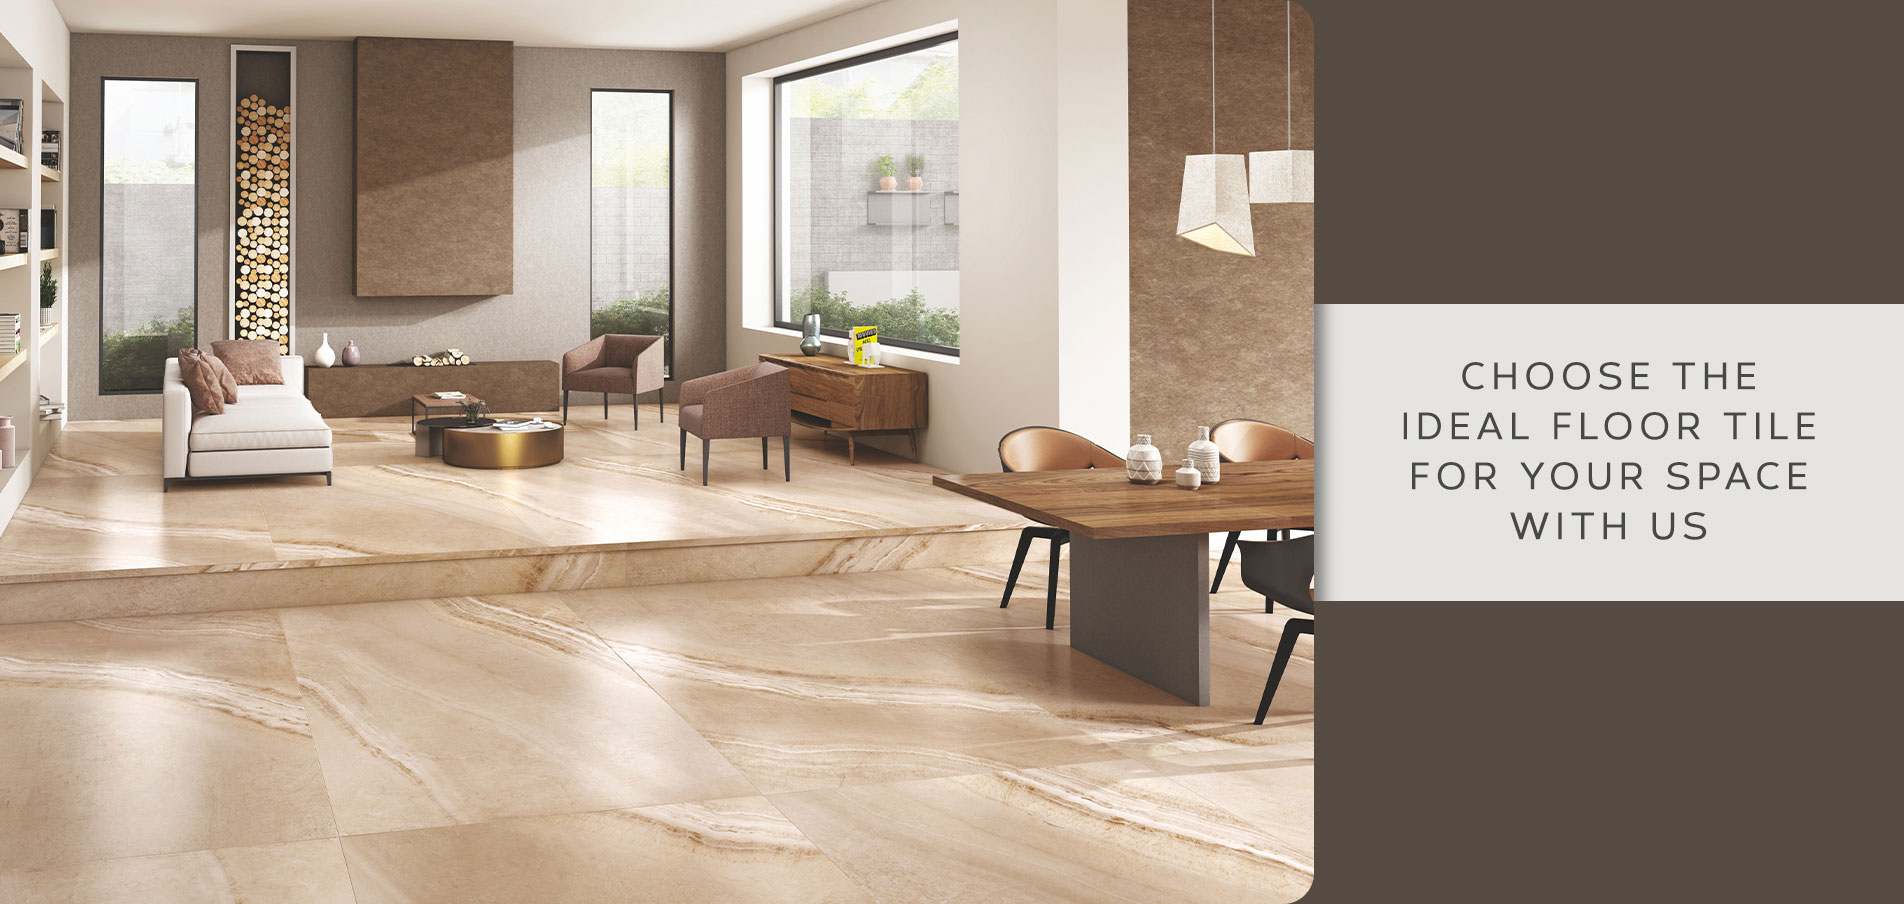 Choose the Ideal floor tile with us